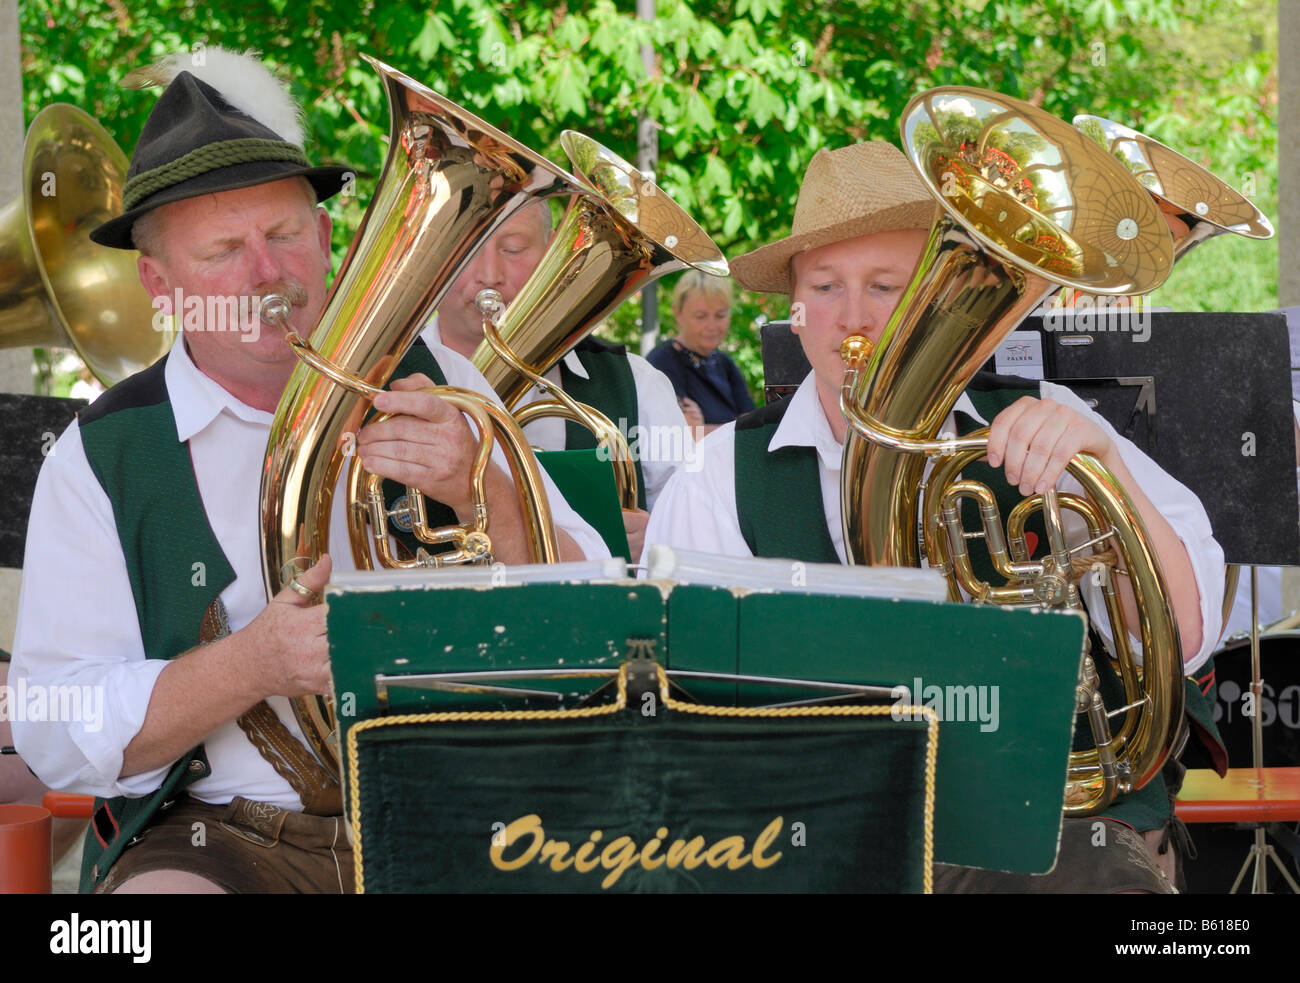 Horn players of the Altnussberger music group at the folk music festival 'Drumherum' in Regen, Lower Bavaria Stock Photo